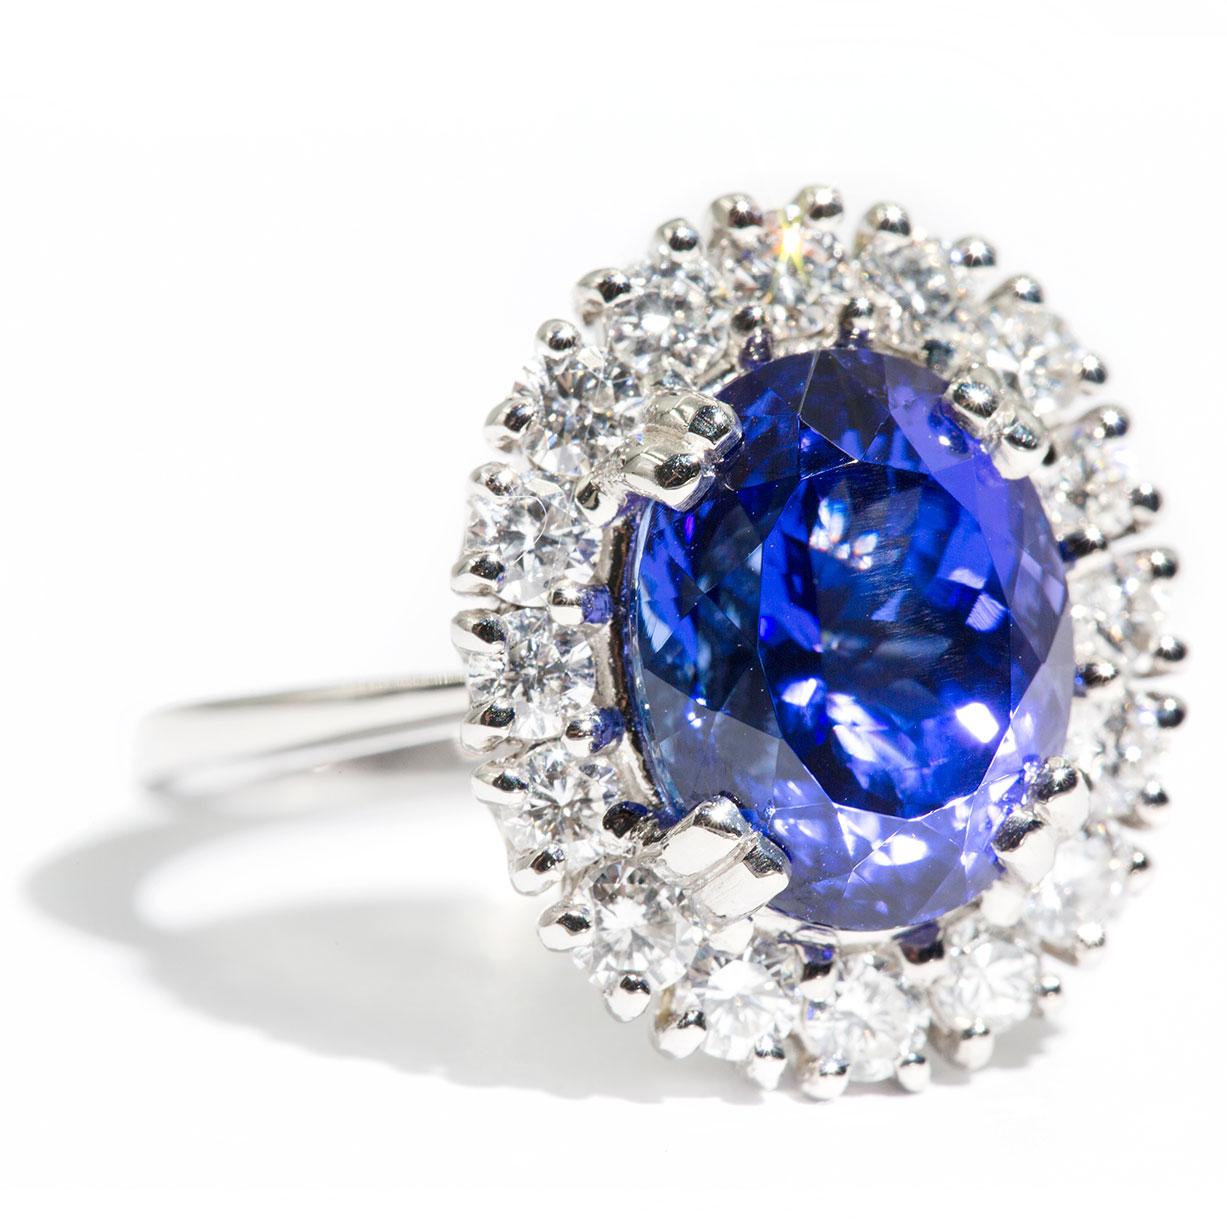 6.47 Carat Oval Flawless Tanzanite and 1.51 Carat Diamond Platinum Cocktail Ring For Sale 8